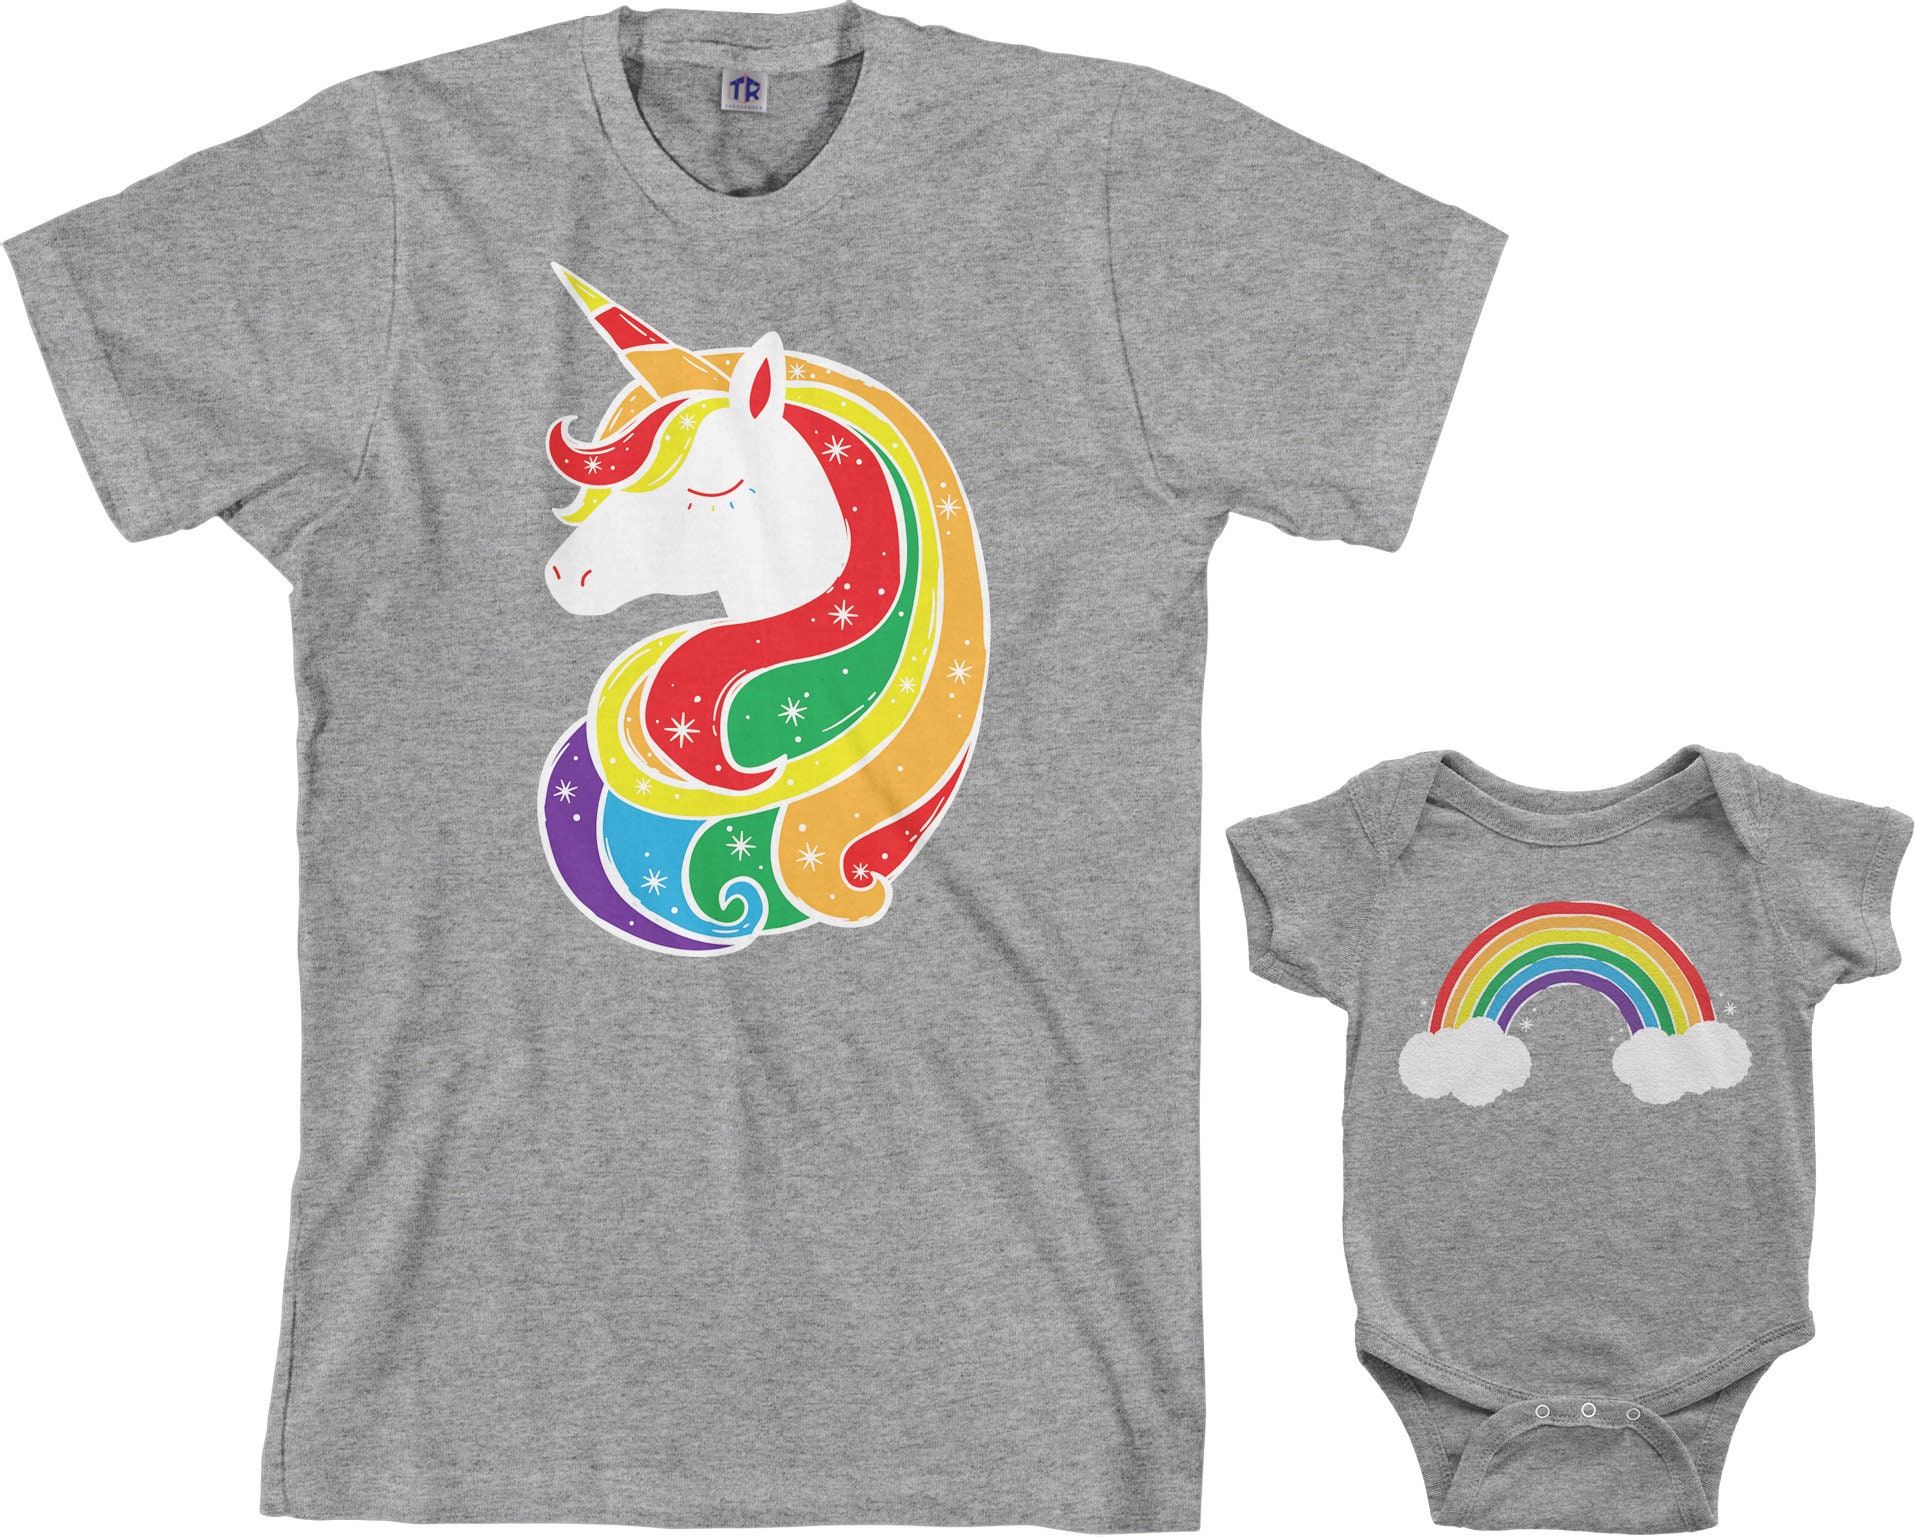 Discover Unicorn & Rainbow Men's T-shirt and Infant Bodysuit Dad and Baby Matching Set